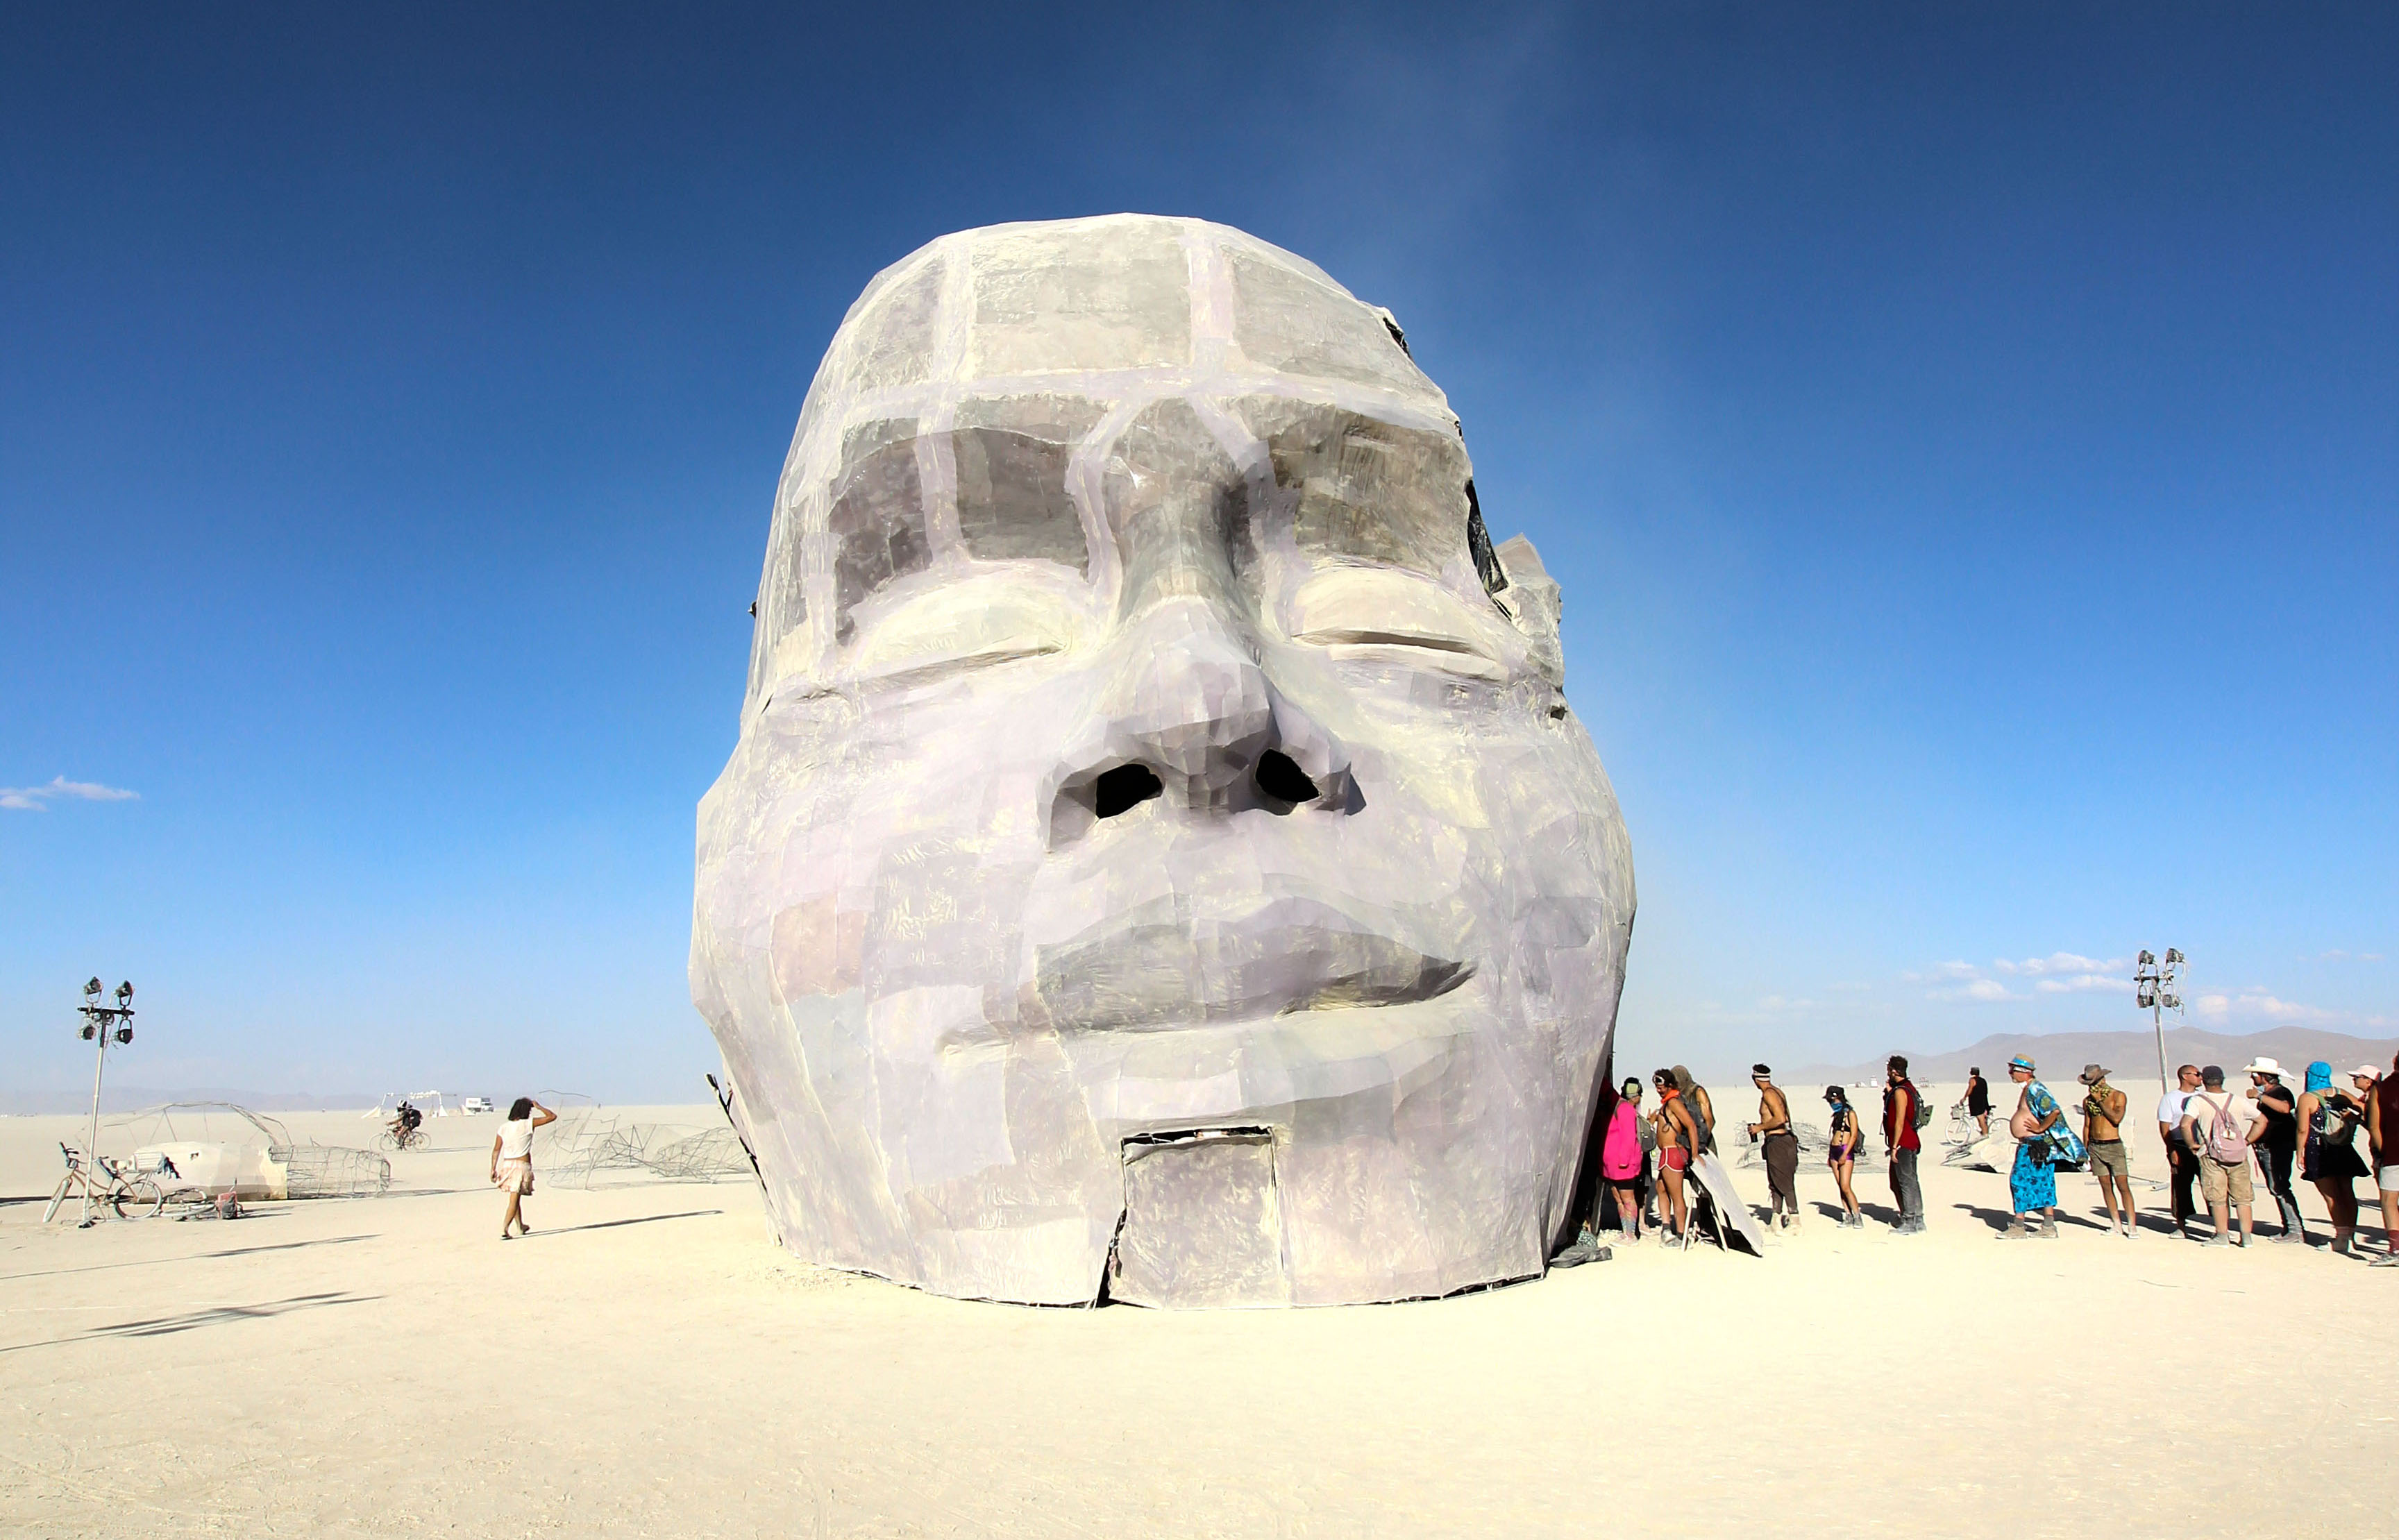 A column of people walk into the sculpture of a 20-foot-tall head that wears a peaceful expression.